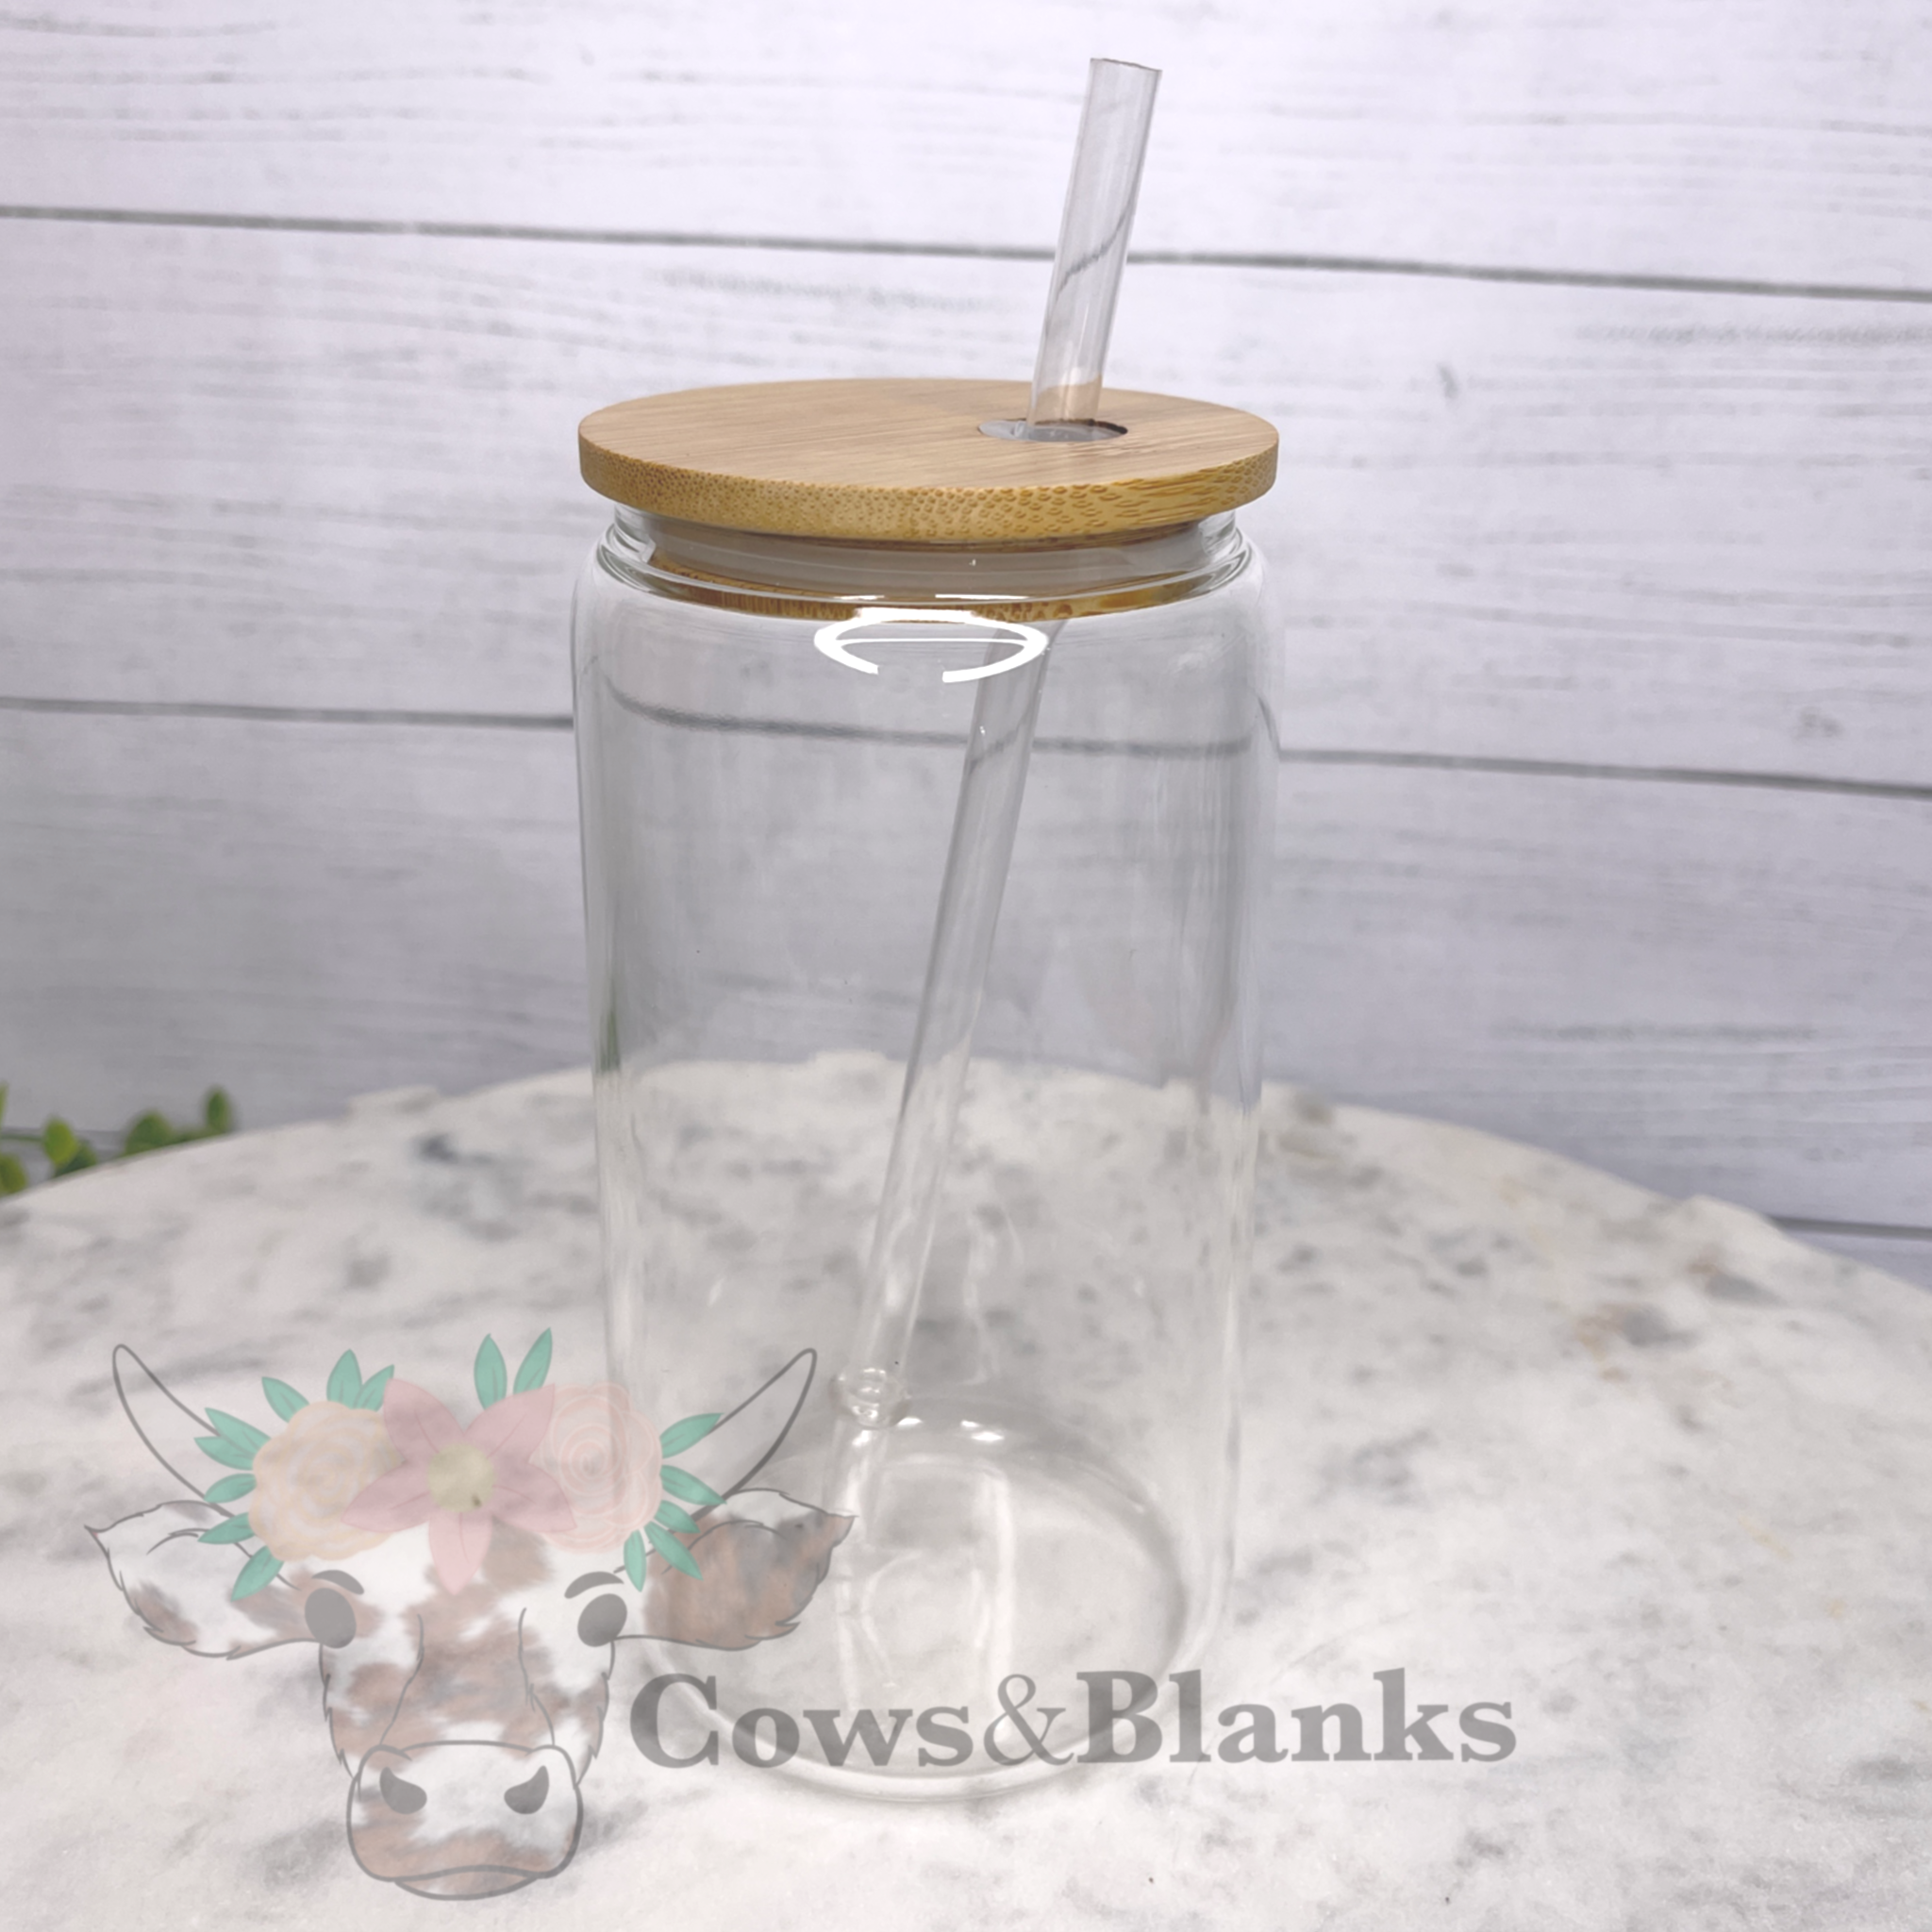 Fix your wings Glass Libby Cup – Gabbie + Co.